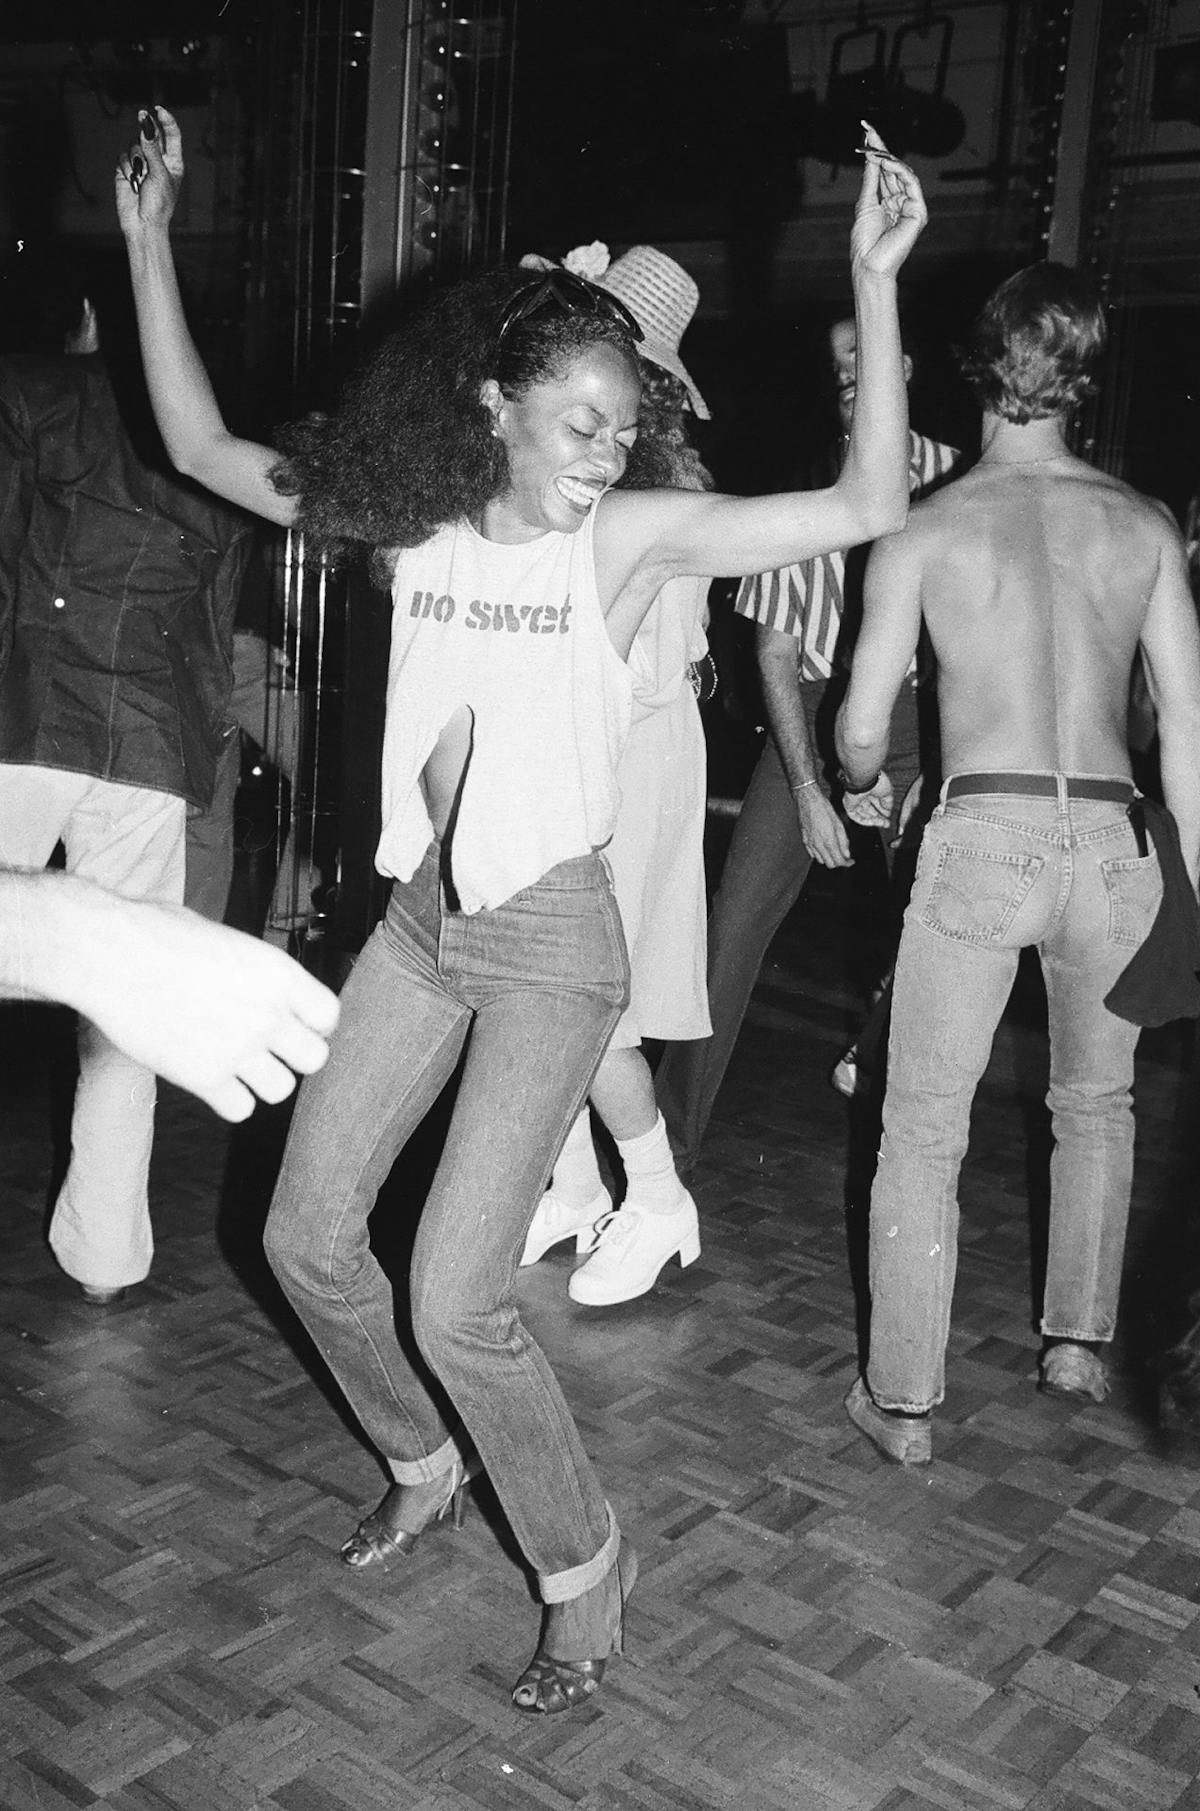 Studio 54 fashion: the stories behind the 70s looks in Halston